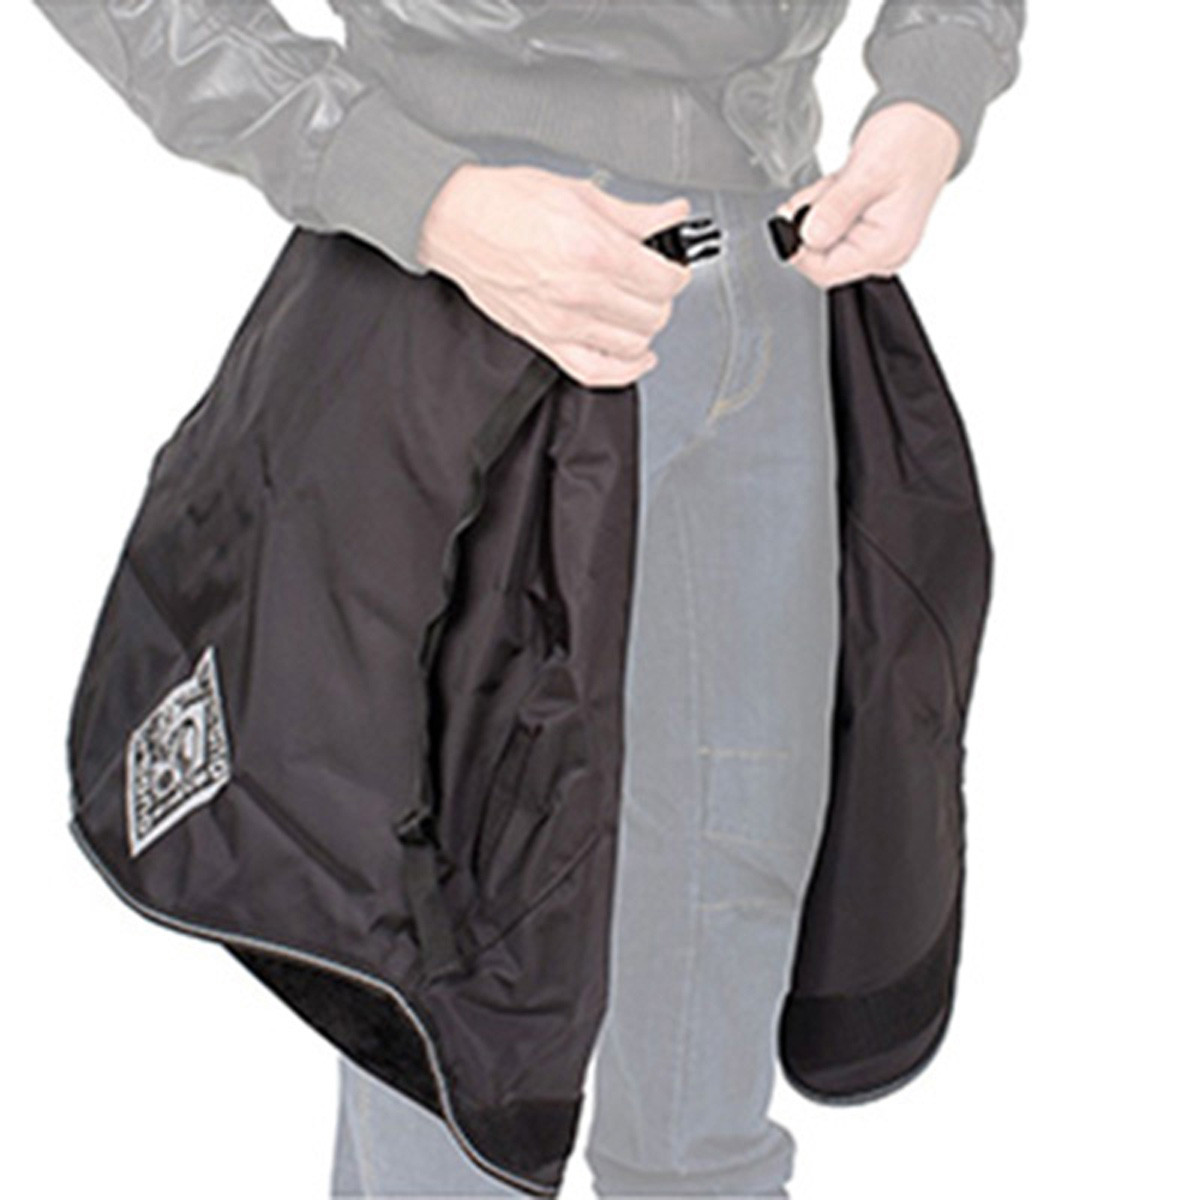 SKIRTEX: tablier, protection, pluie, froid, passager, passagers